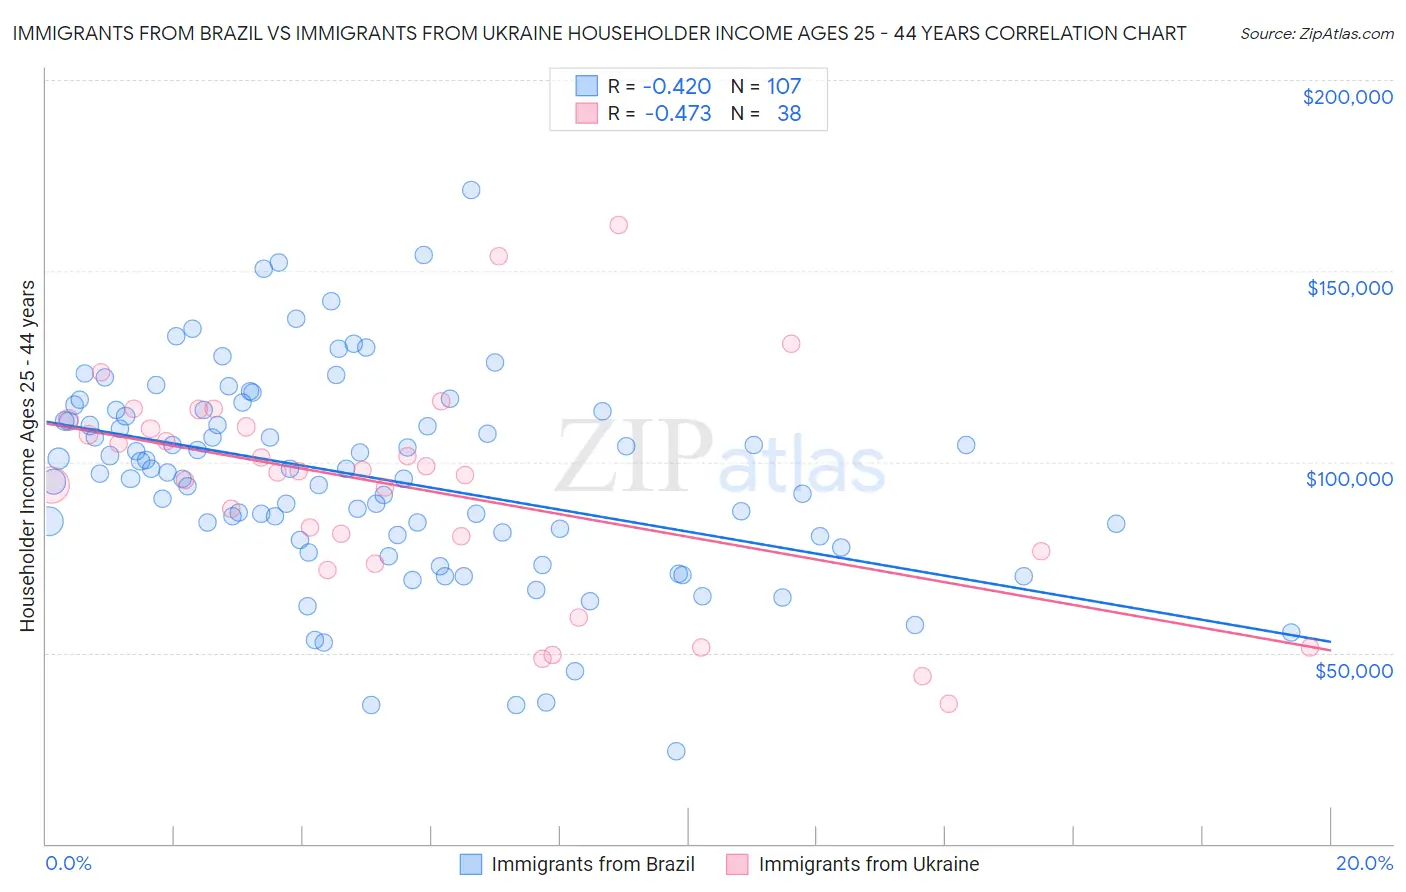 Immigrants from Brazil vs Immigrants from Ukraine Householder Income Ages 25 - 44 years